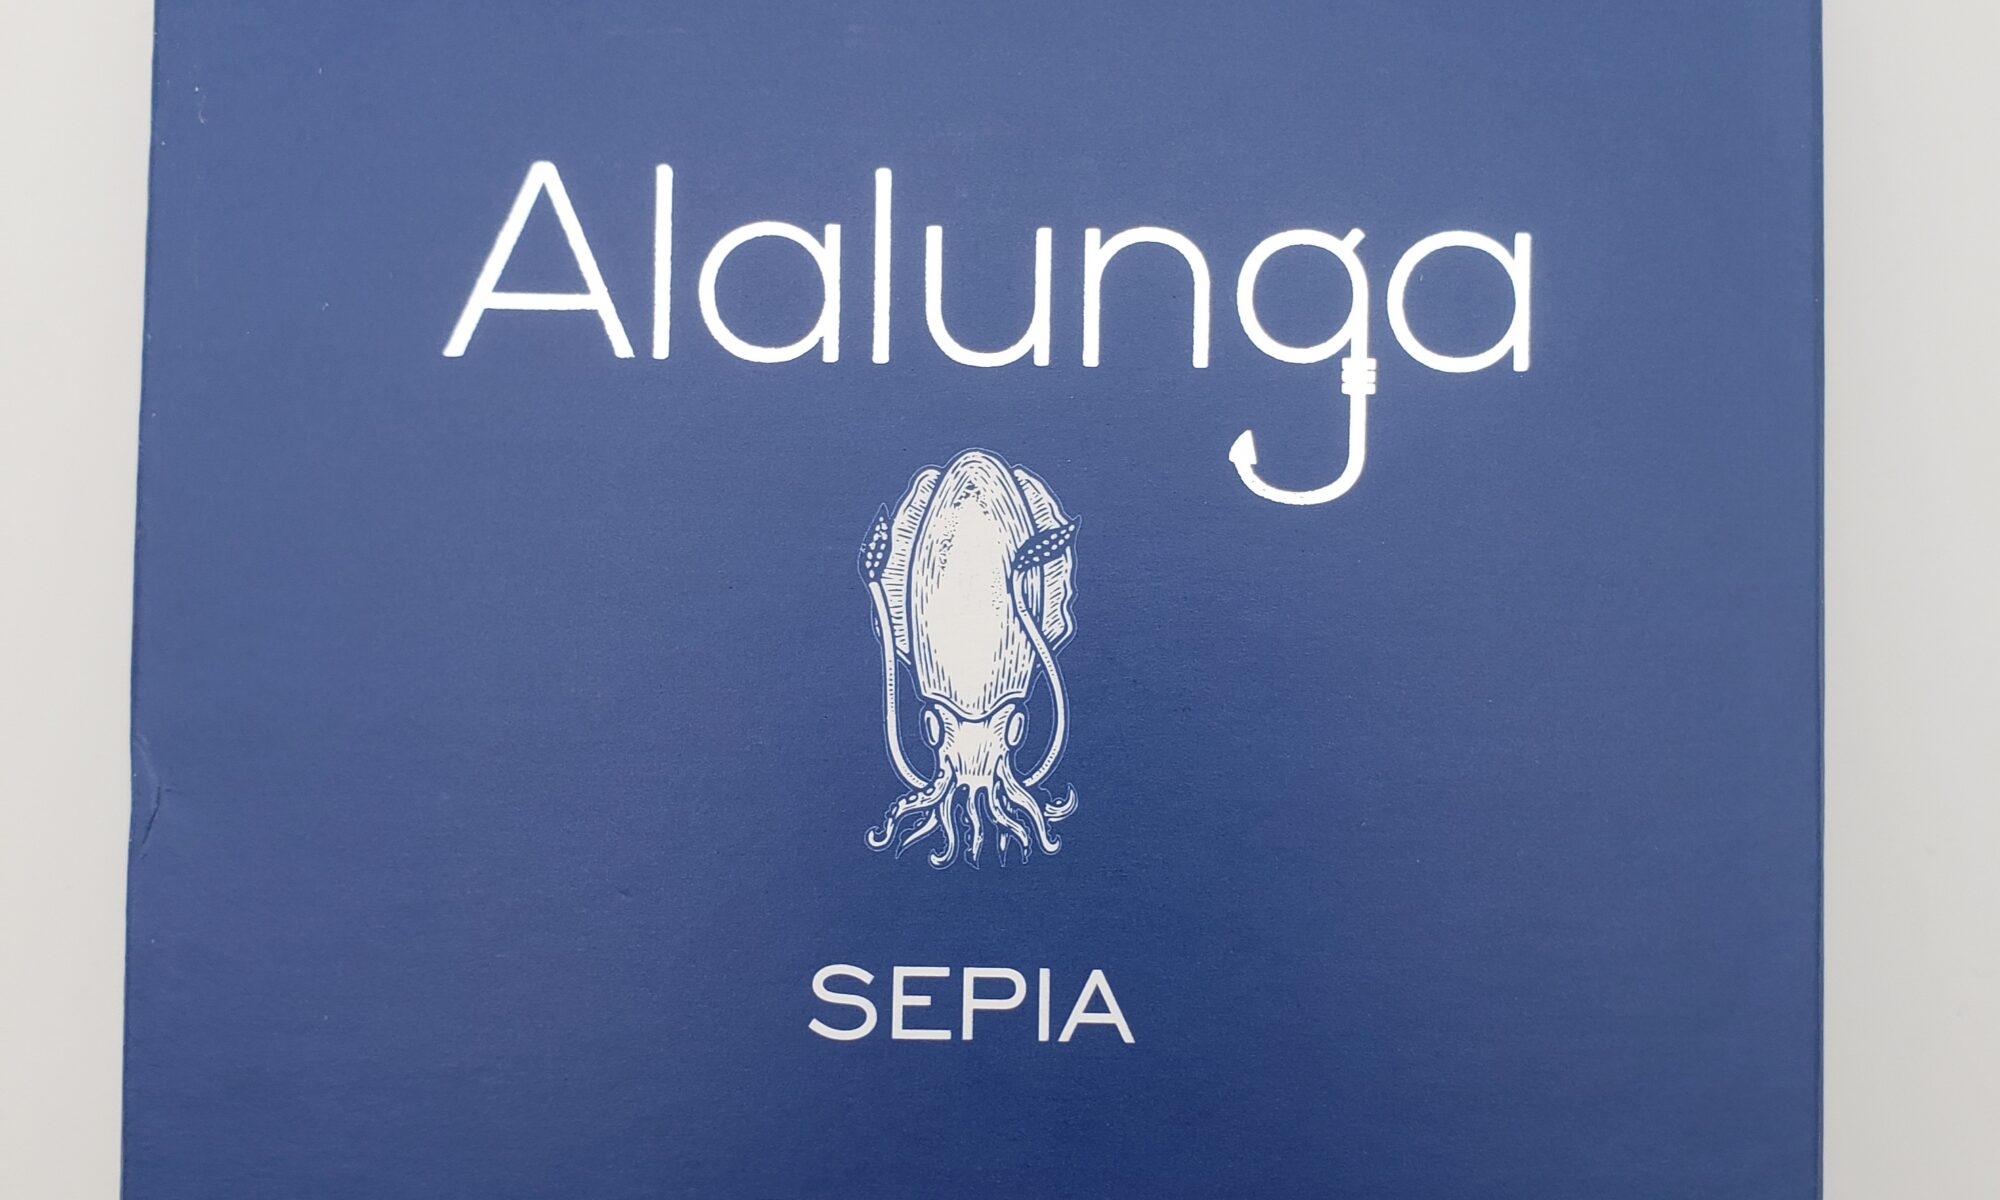 Image of Alalunga cuttlefish in its own ink